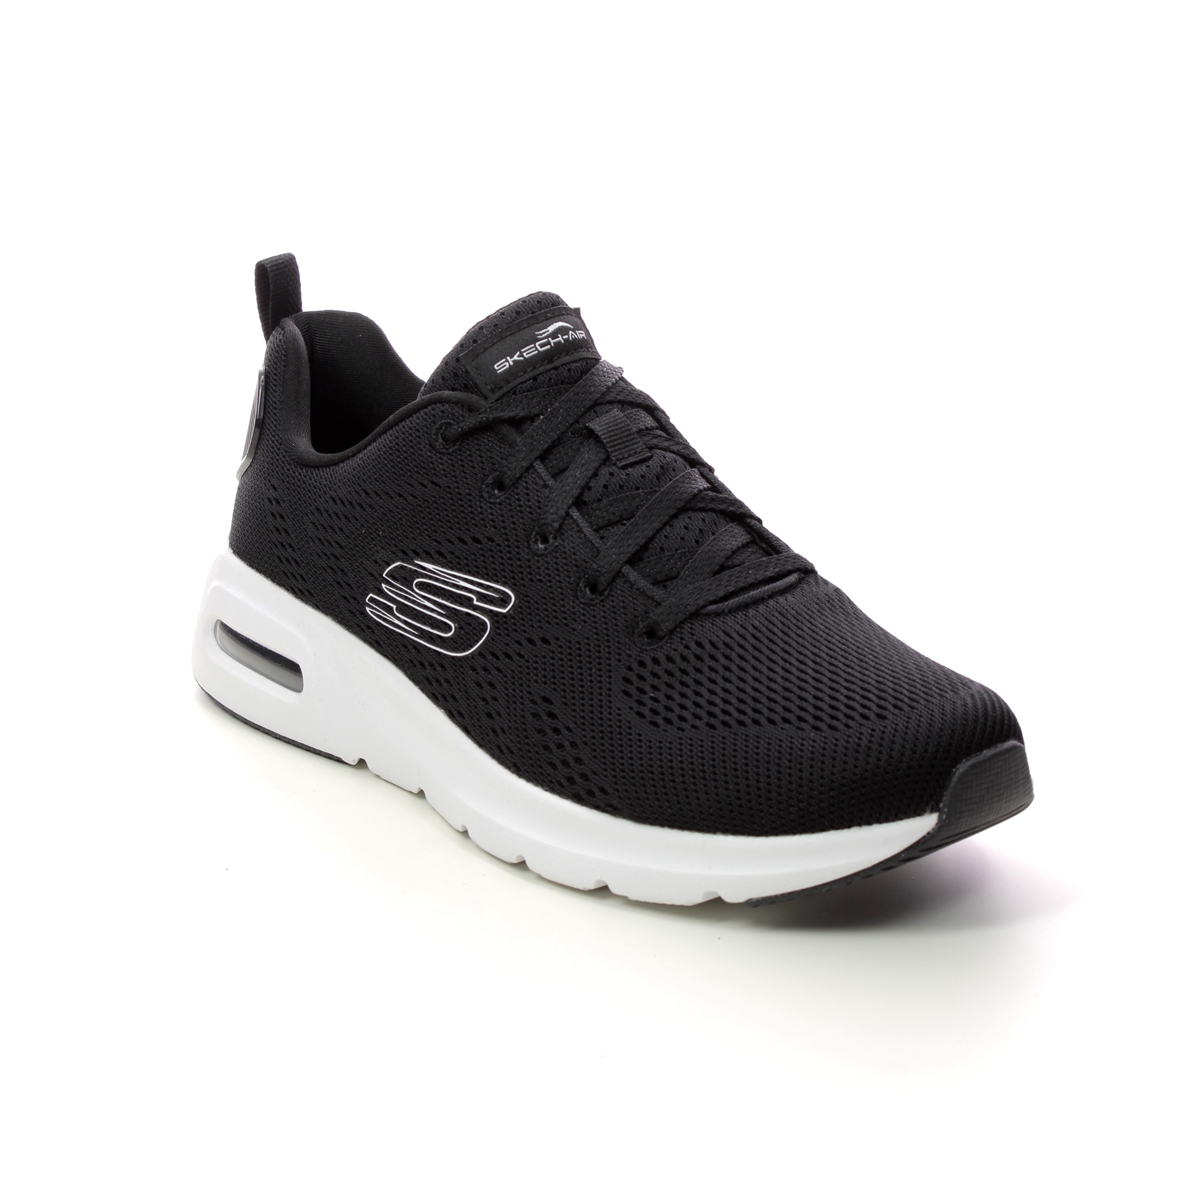 Skechers Skech Air Court Black White Womens Trainers 149948 In Size 7 In Plain Black White